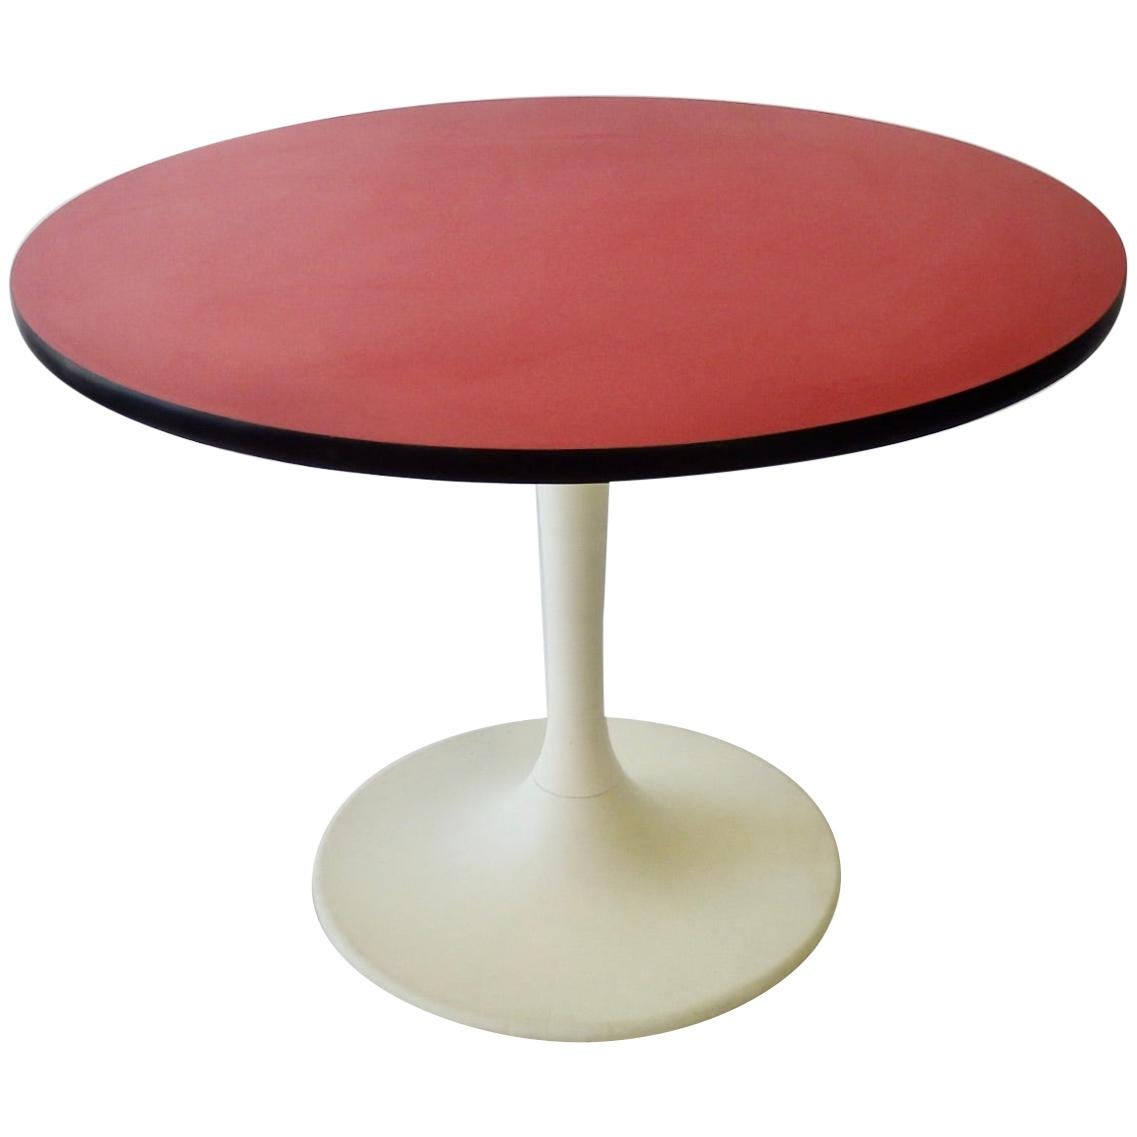 Round Red Top Tulip Base Dining Table by Maurice Burke for Arcana